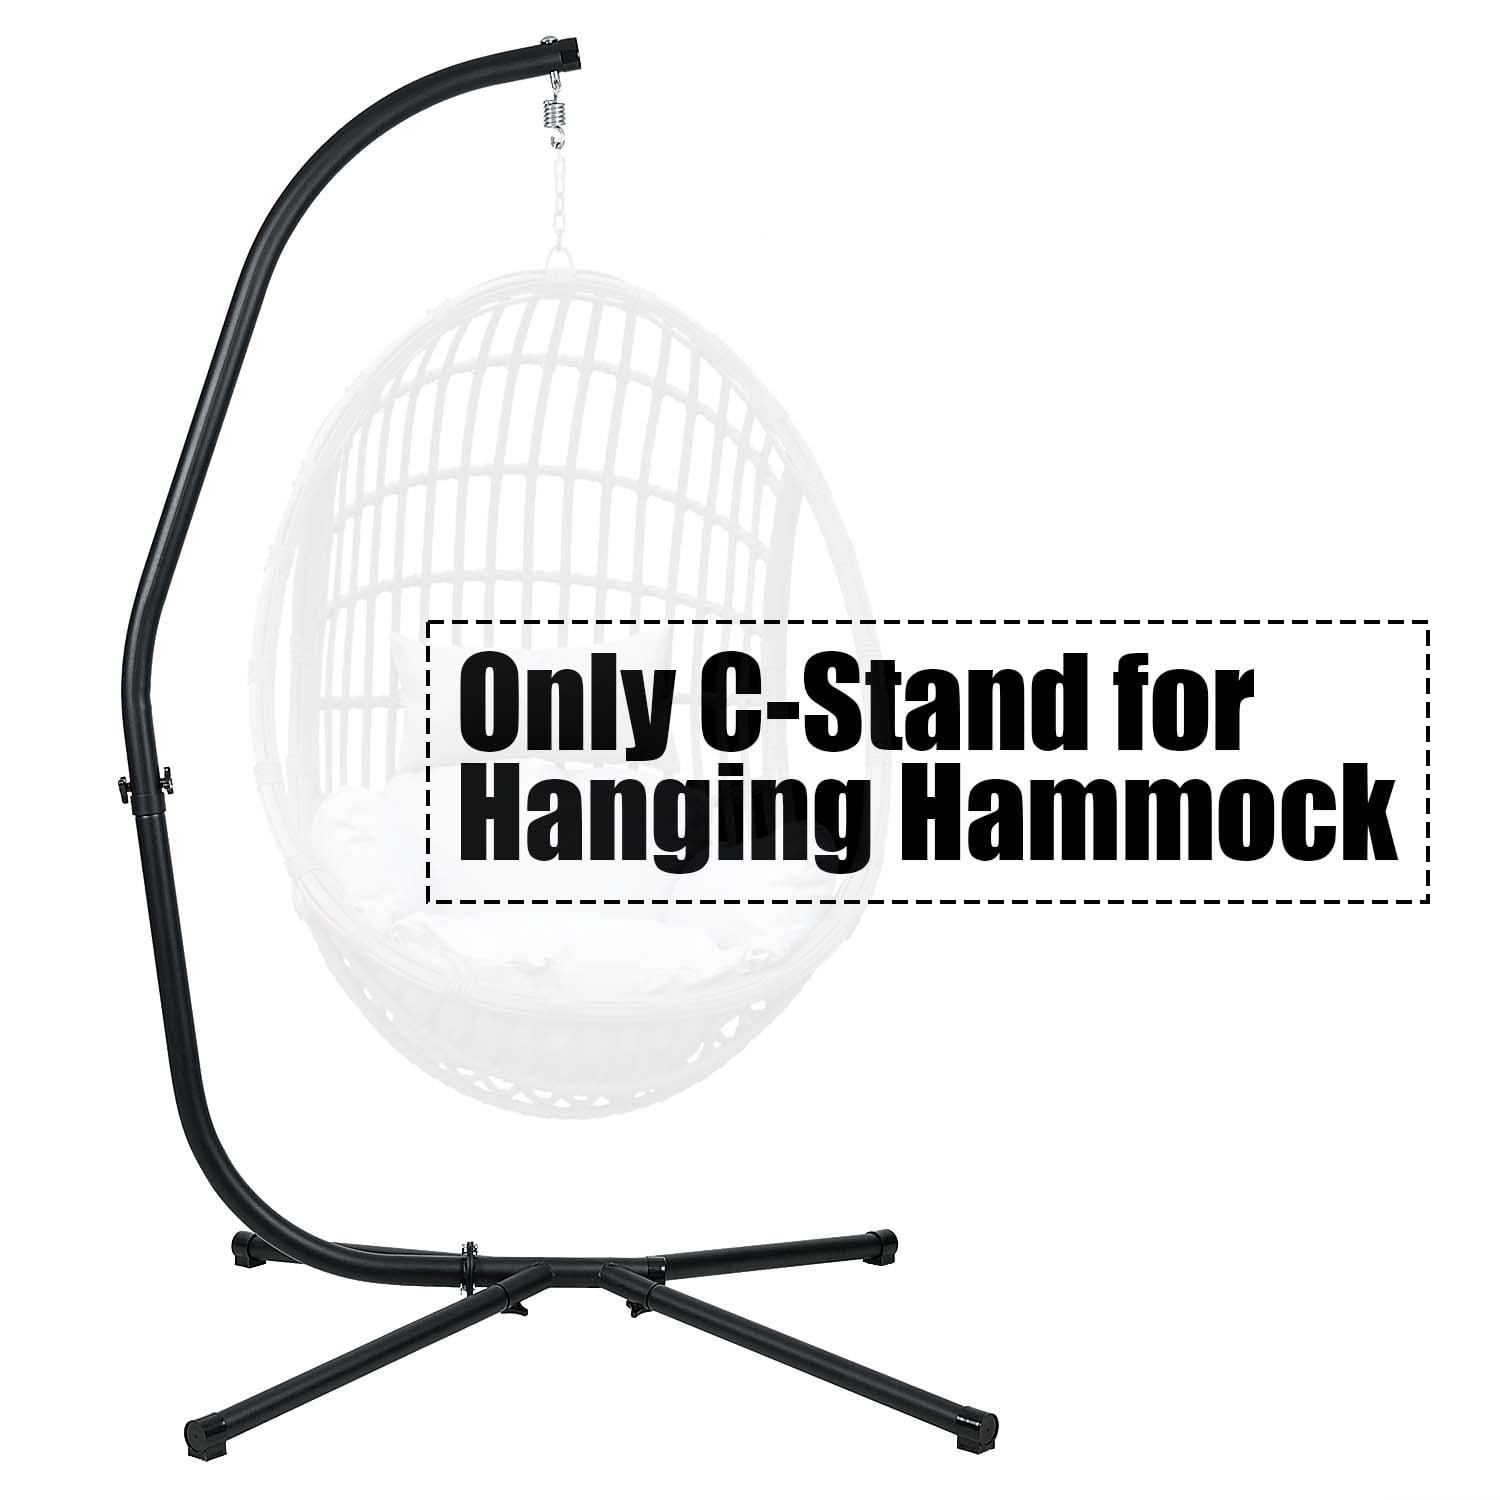 Merrick Lane Heavy Duty All-Weather Hanging Hammock Chair C-Stand with  Steel Offset Base and 360 Degree Rotation, Black 